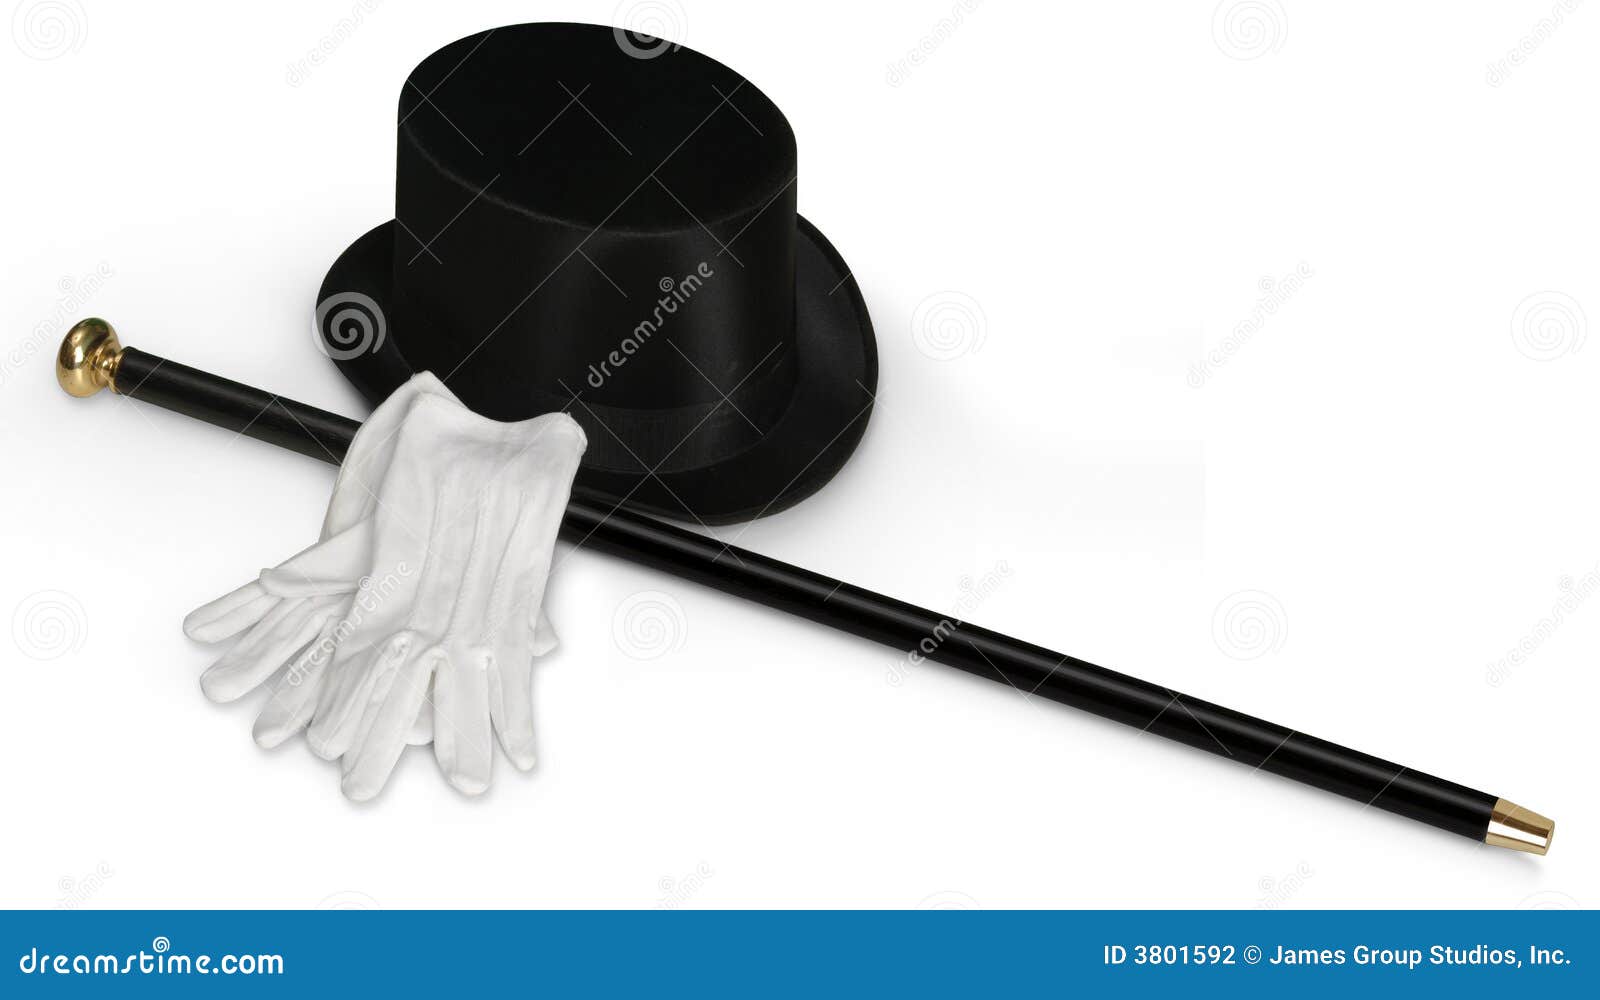 free clipart top hat and cane - photo #19